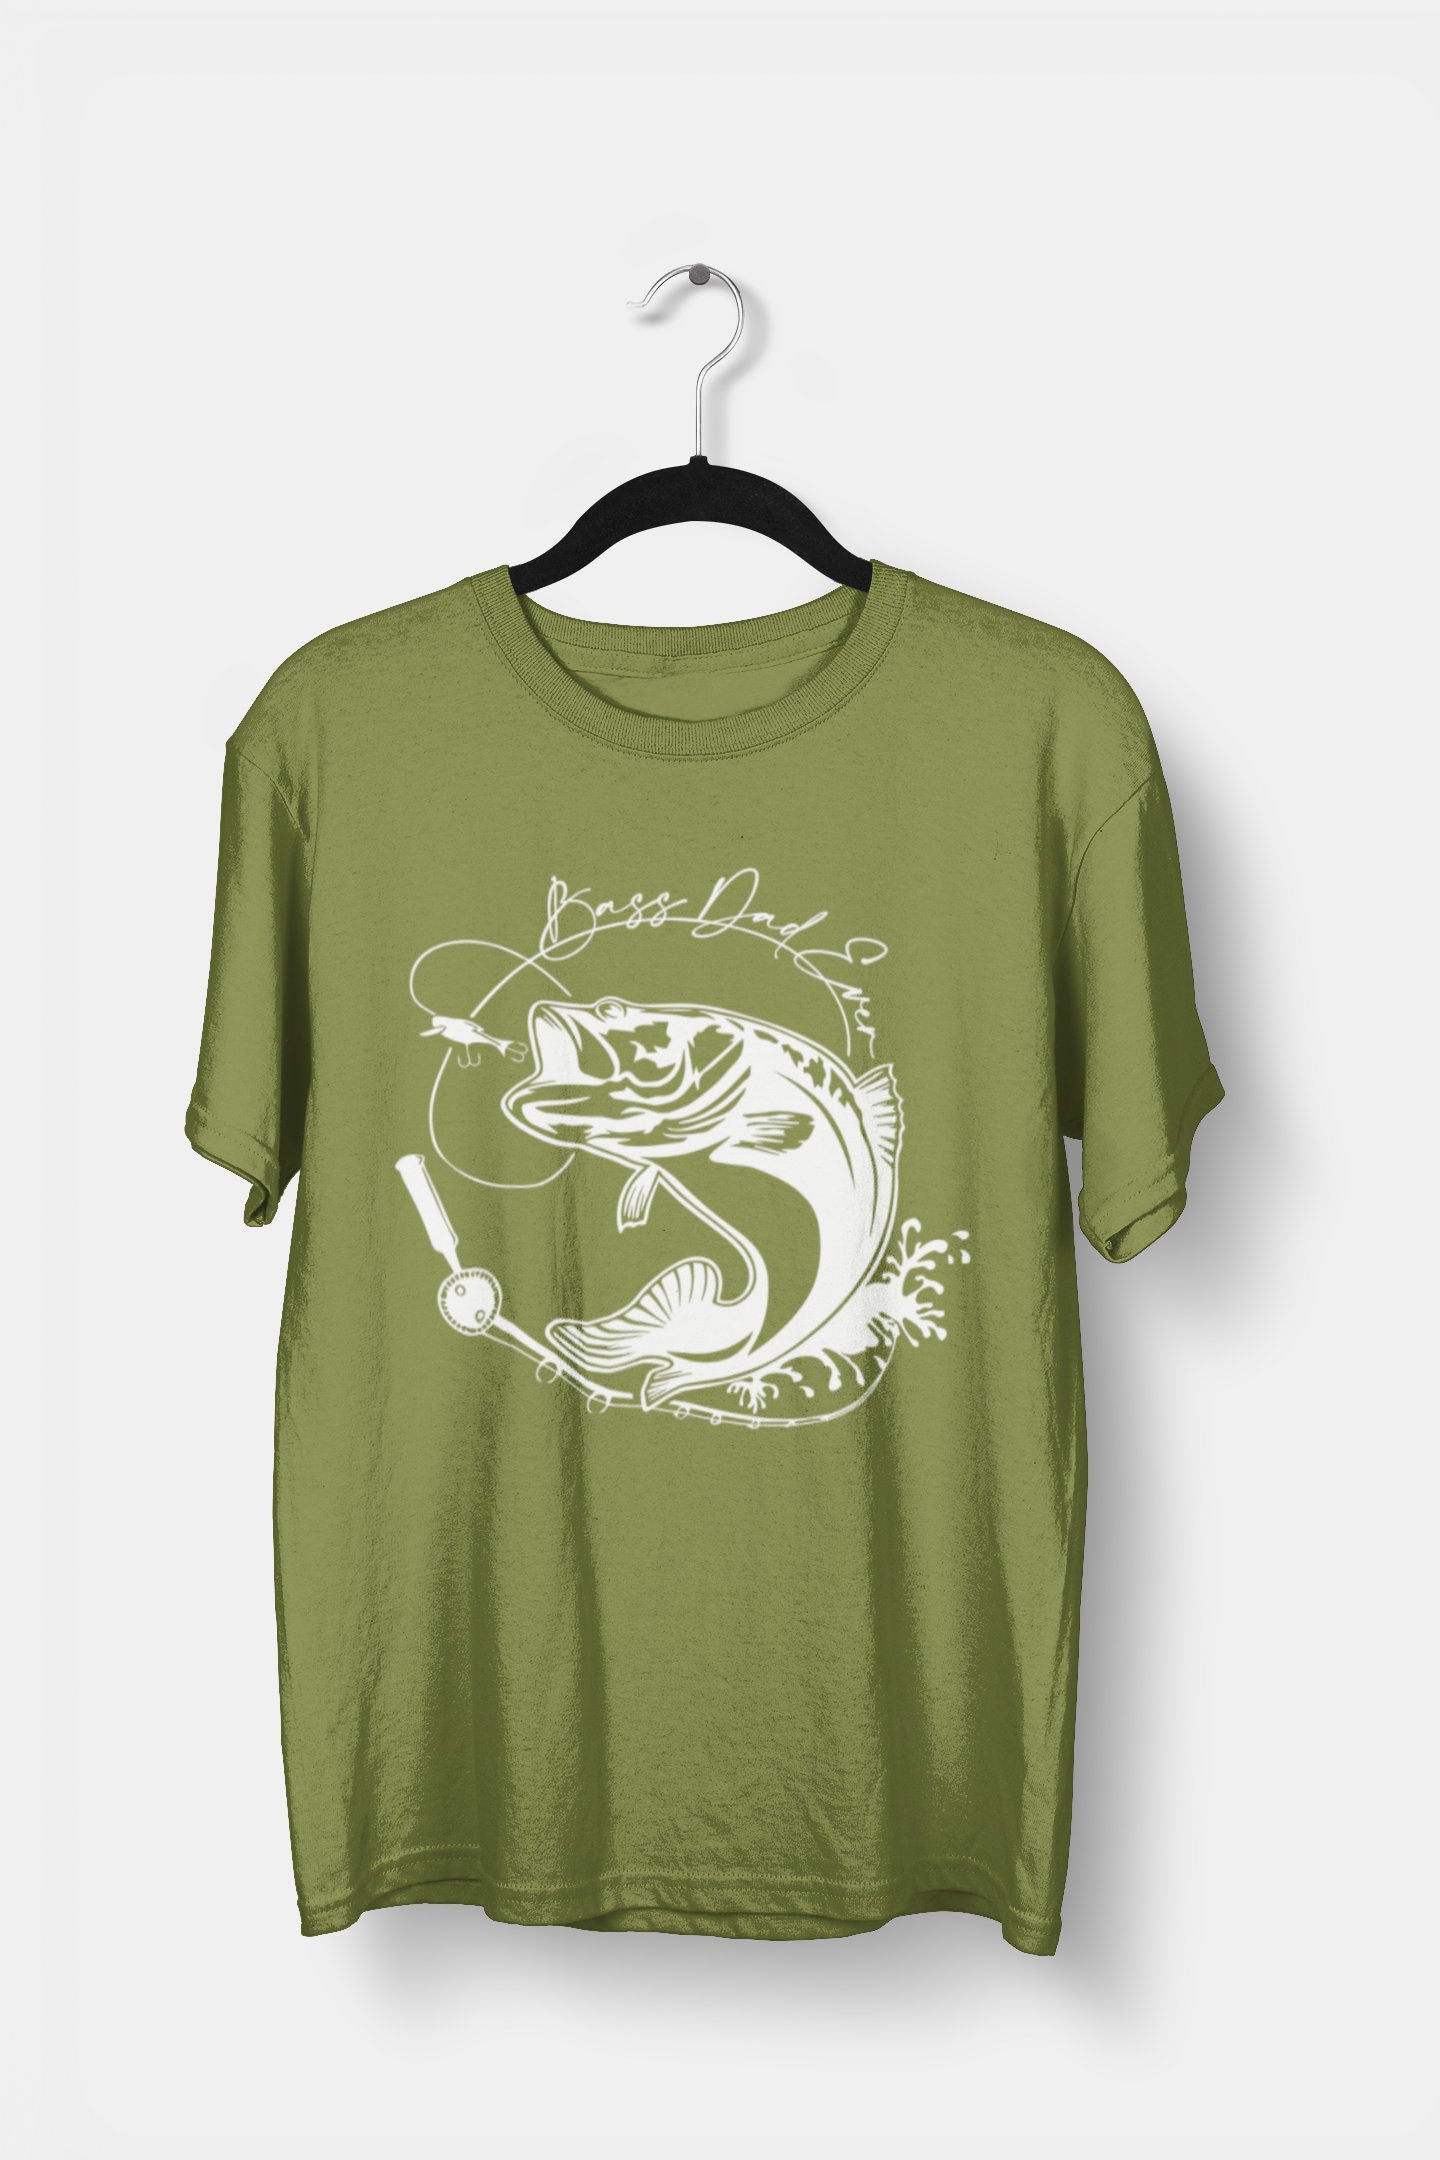 Bass Dad Ever - Father's Day fishing shirt